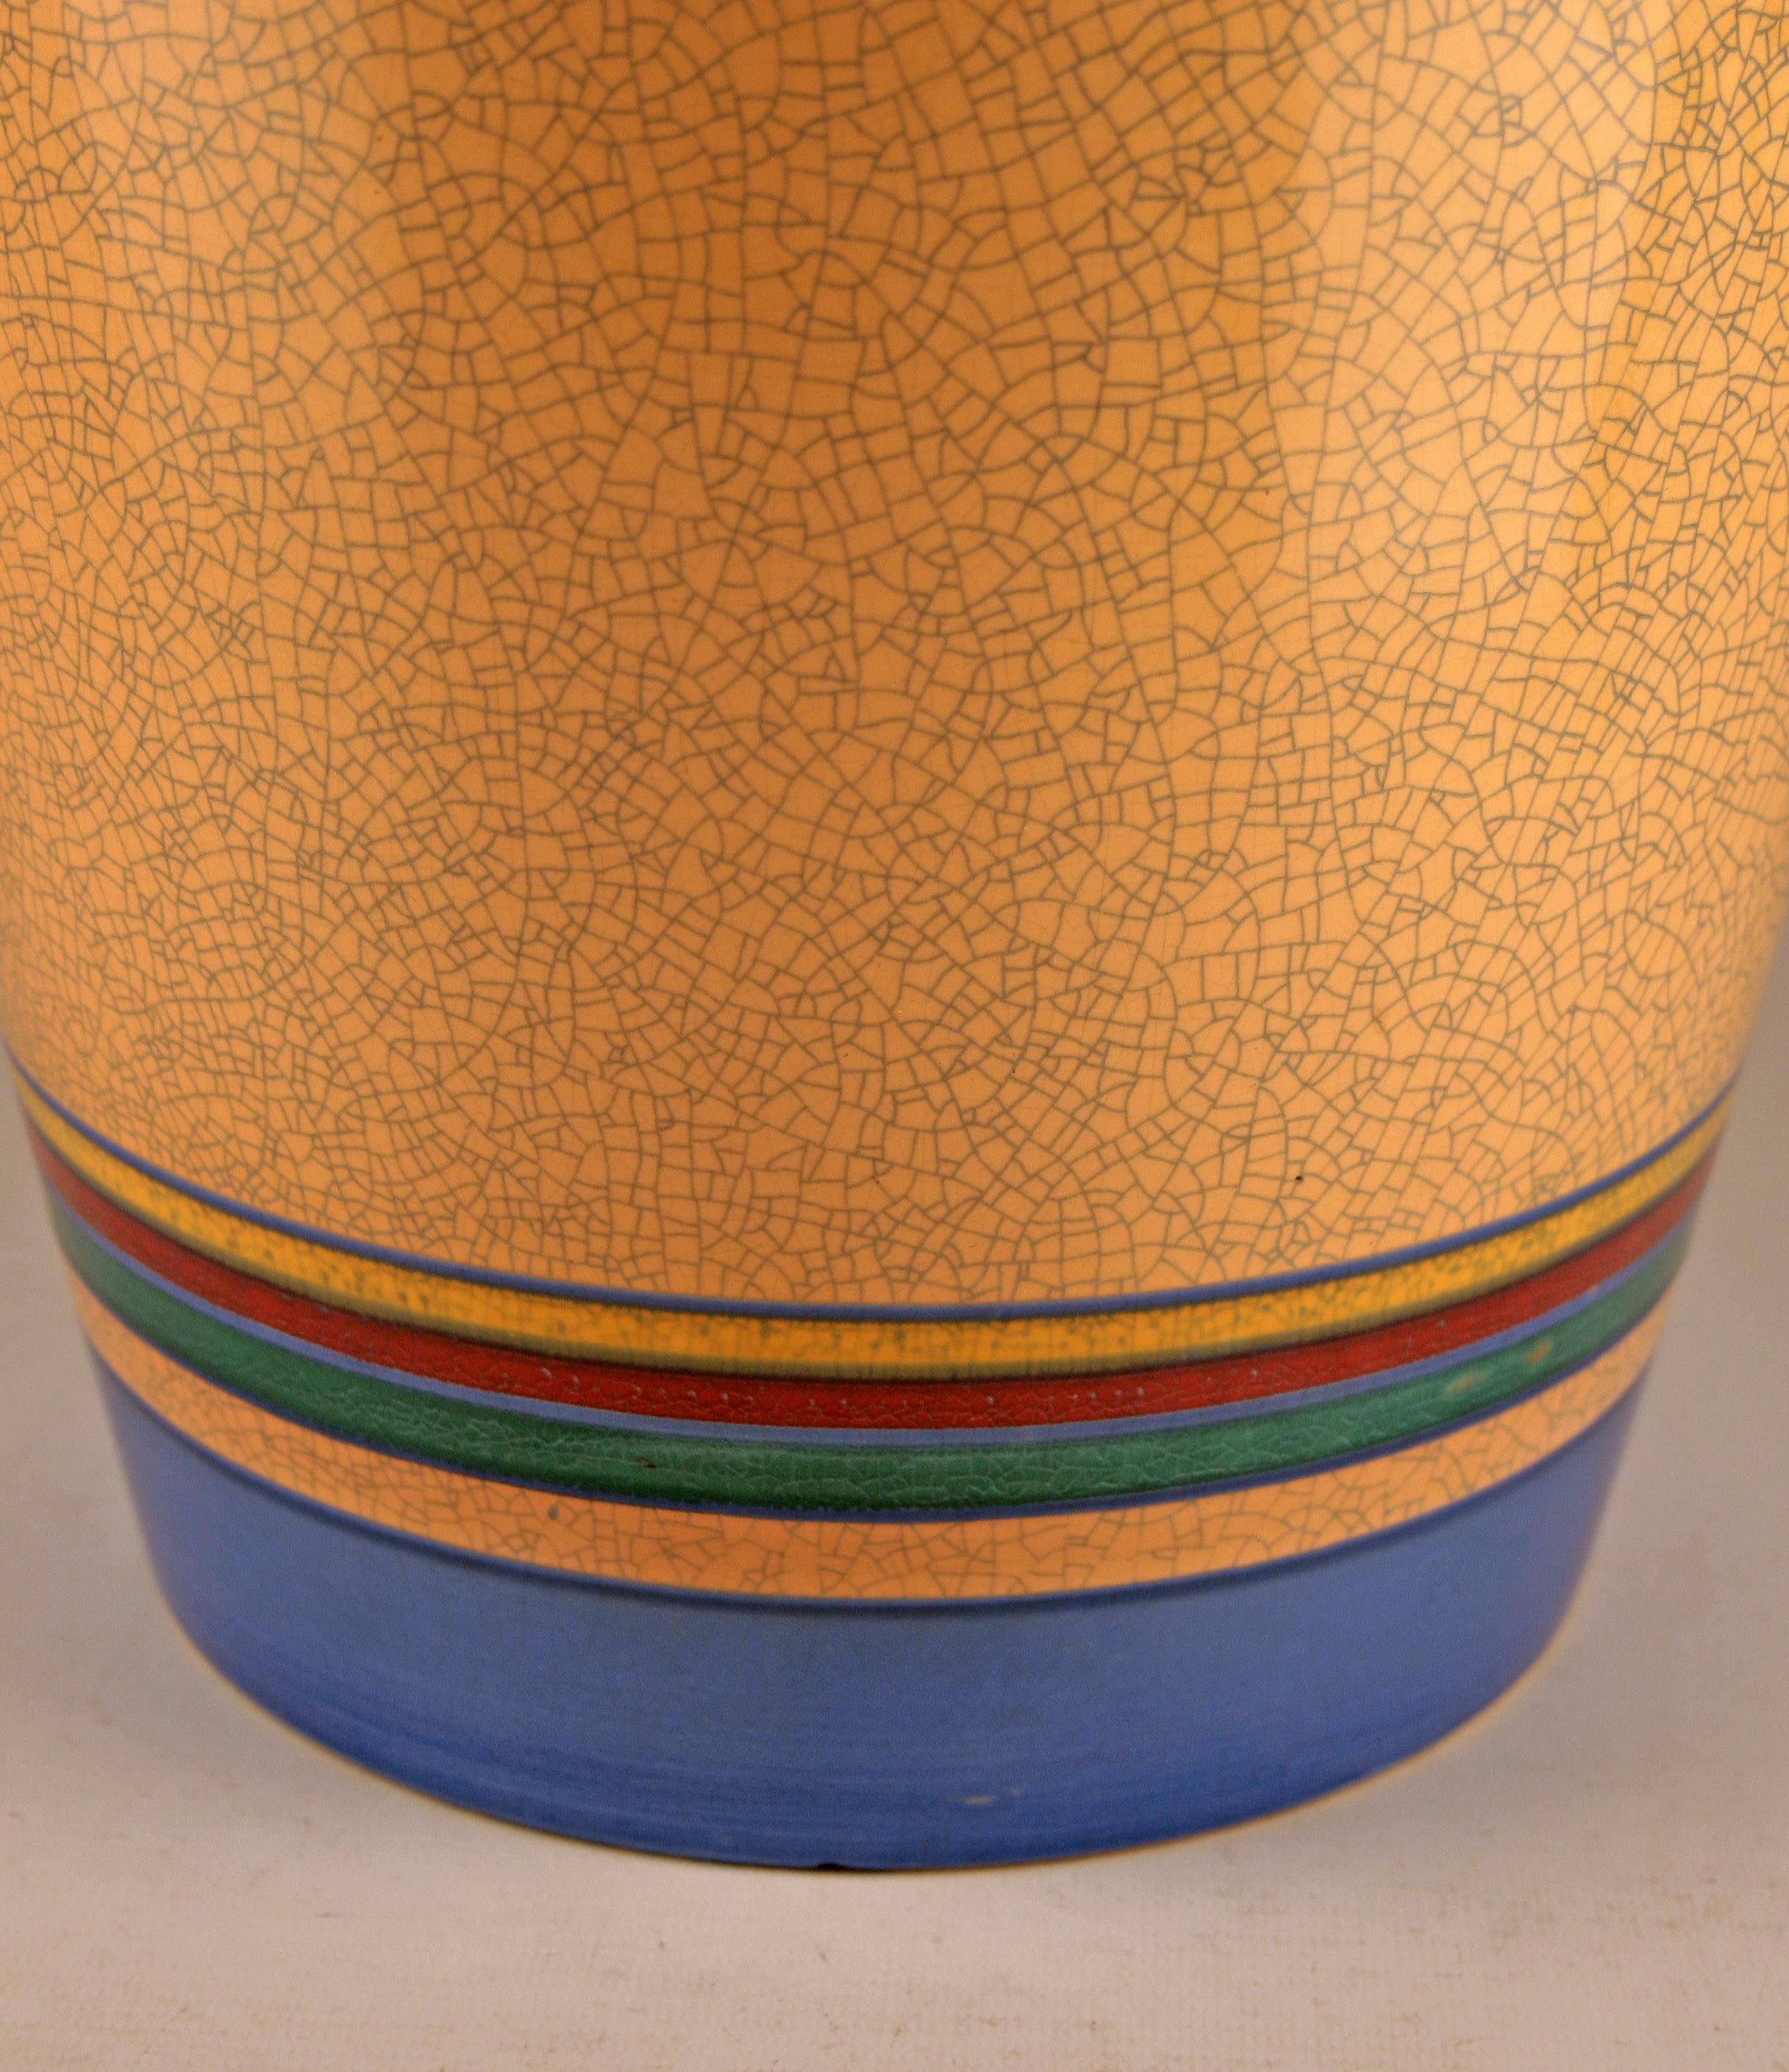 Mid-20th Century Modern Post-War Painted Glazed Ceramic Vase from West Germany For Sale 1